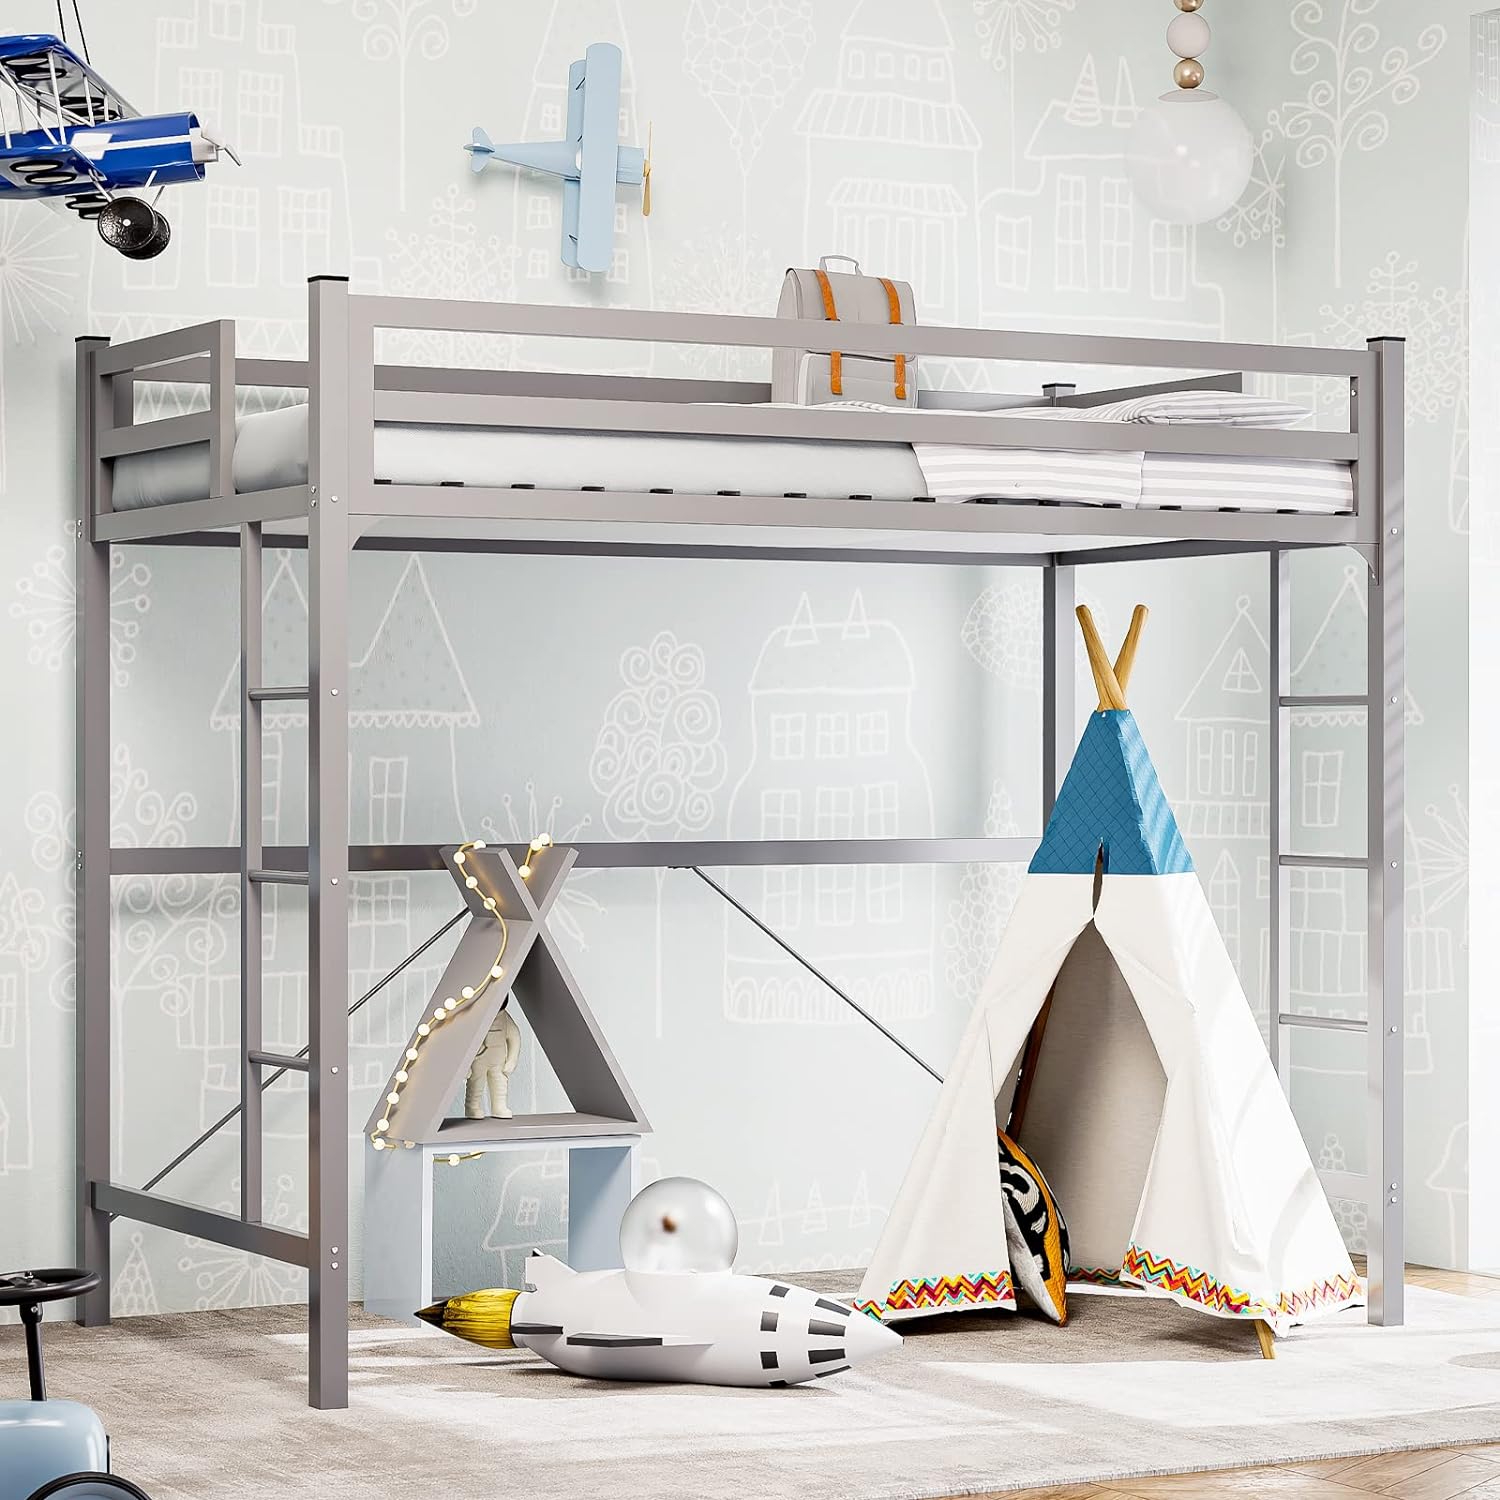 IKIFLY Metal Twin Size Loft Bed Frame - Heavy Duty Junior Loft Beds with 2 Ladders & Safety Guard Rail, Space-Saving, Noise Free, No Box Spring Needed - Silver Grey